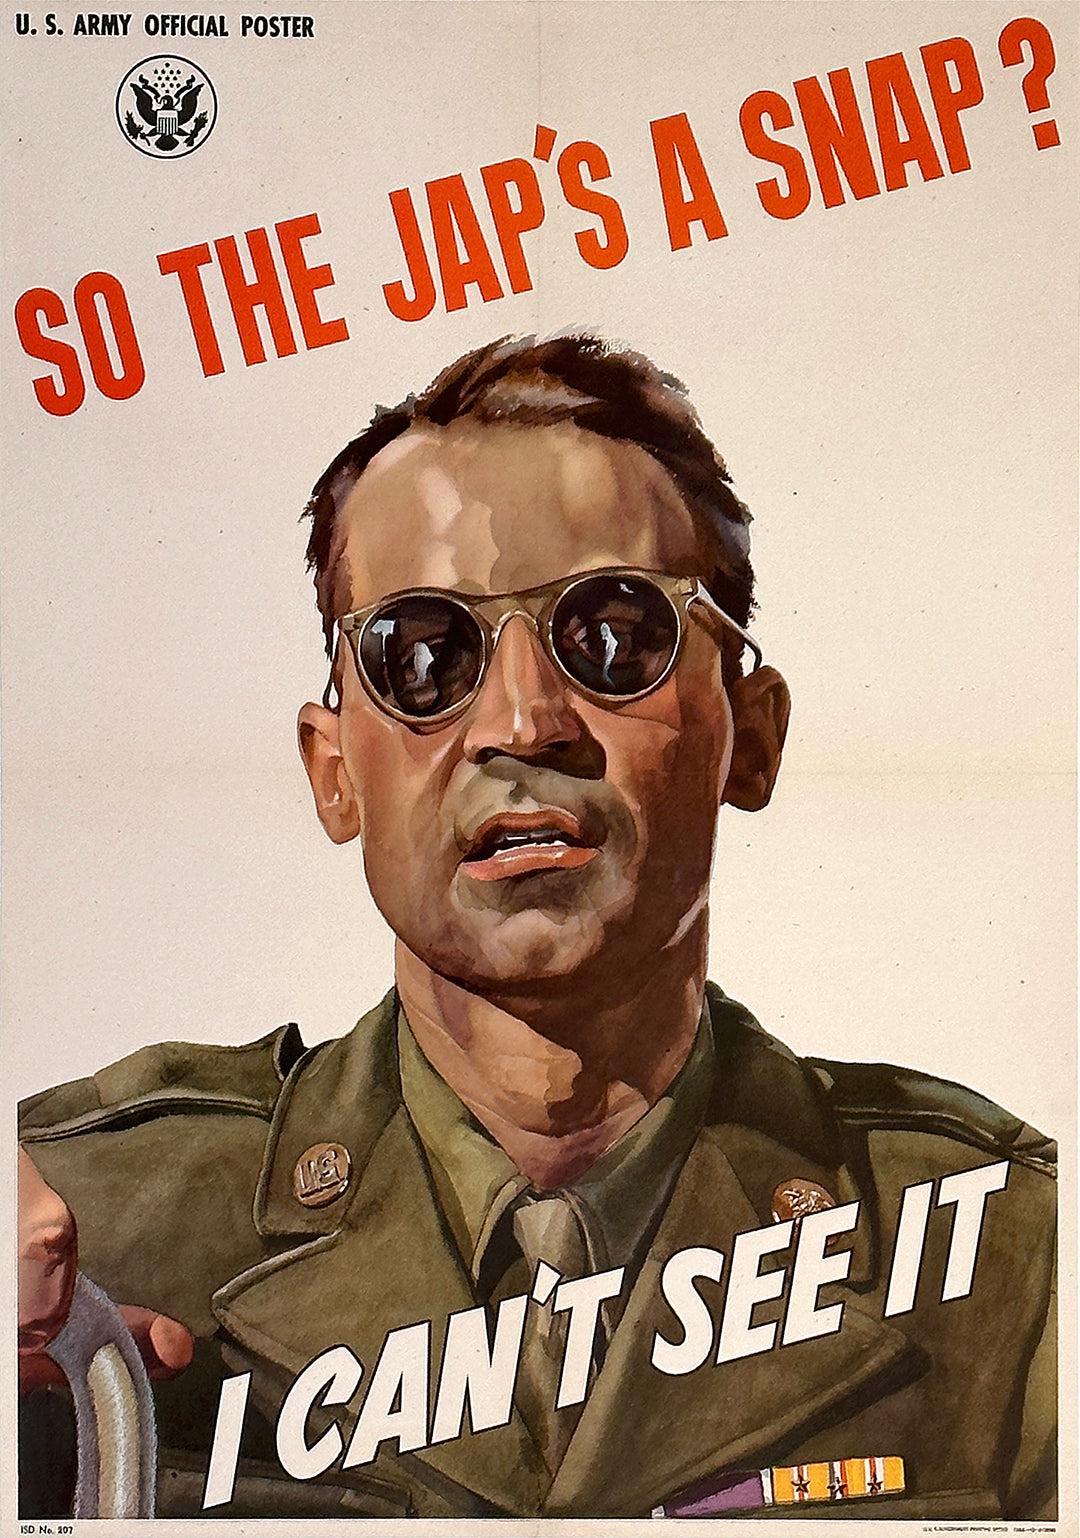 So the Jap's a Snap? I Can't See It Original Vintage WWII Poster Army